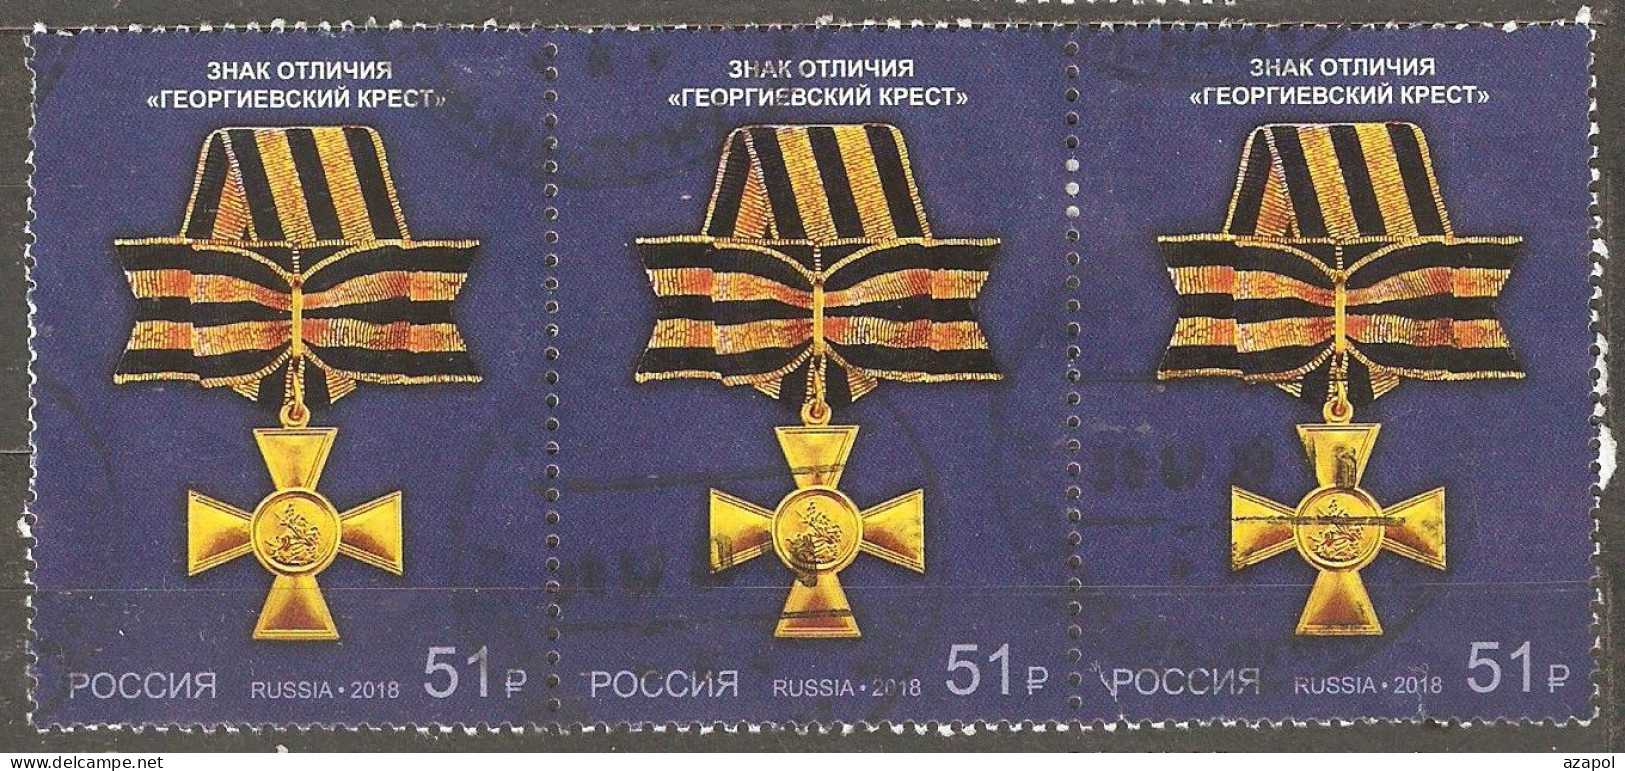 Russia: 1 Used Stamp Of A Set In Strip Of 3, State Awards Of Russian Federation - St. George's Cross, 2018, Mi#2647 - Gebruikt